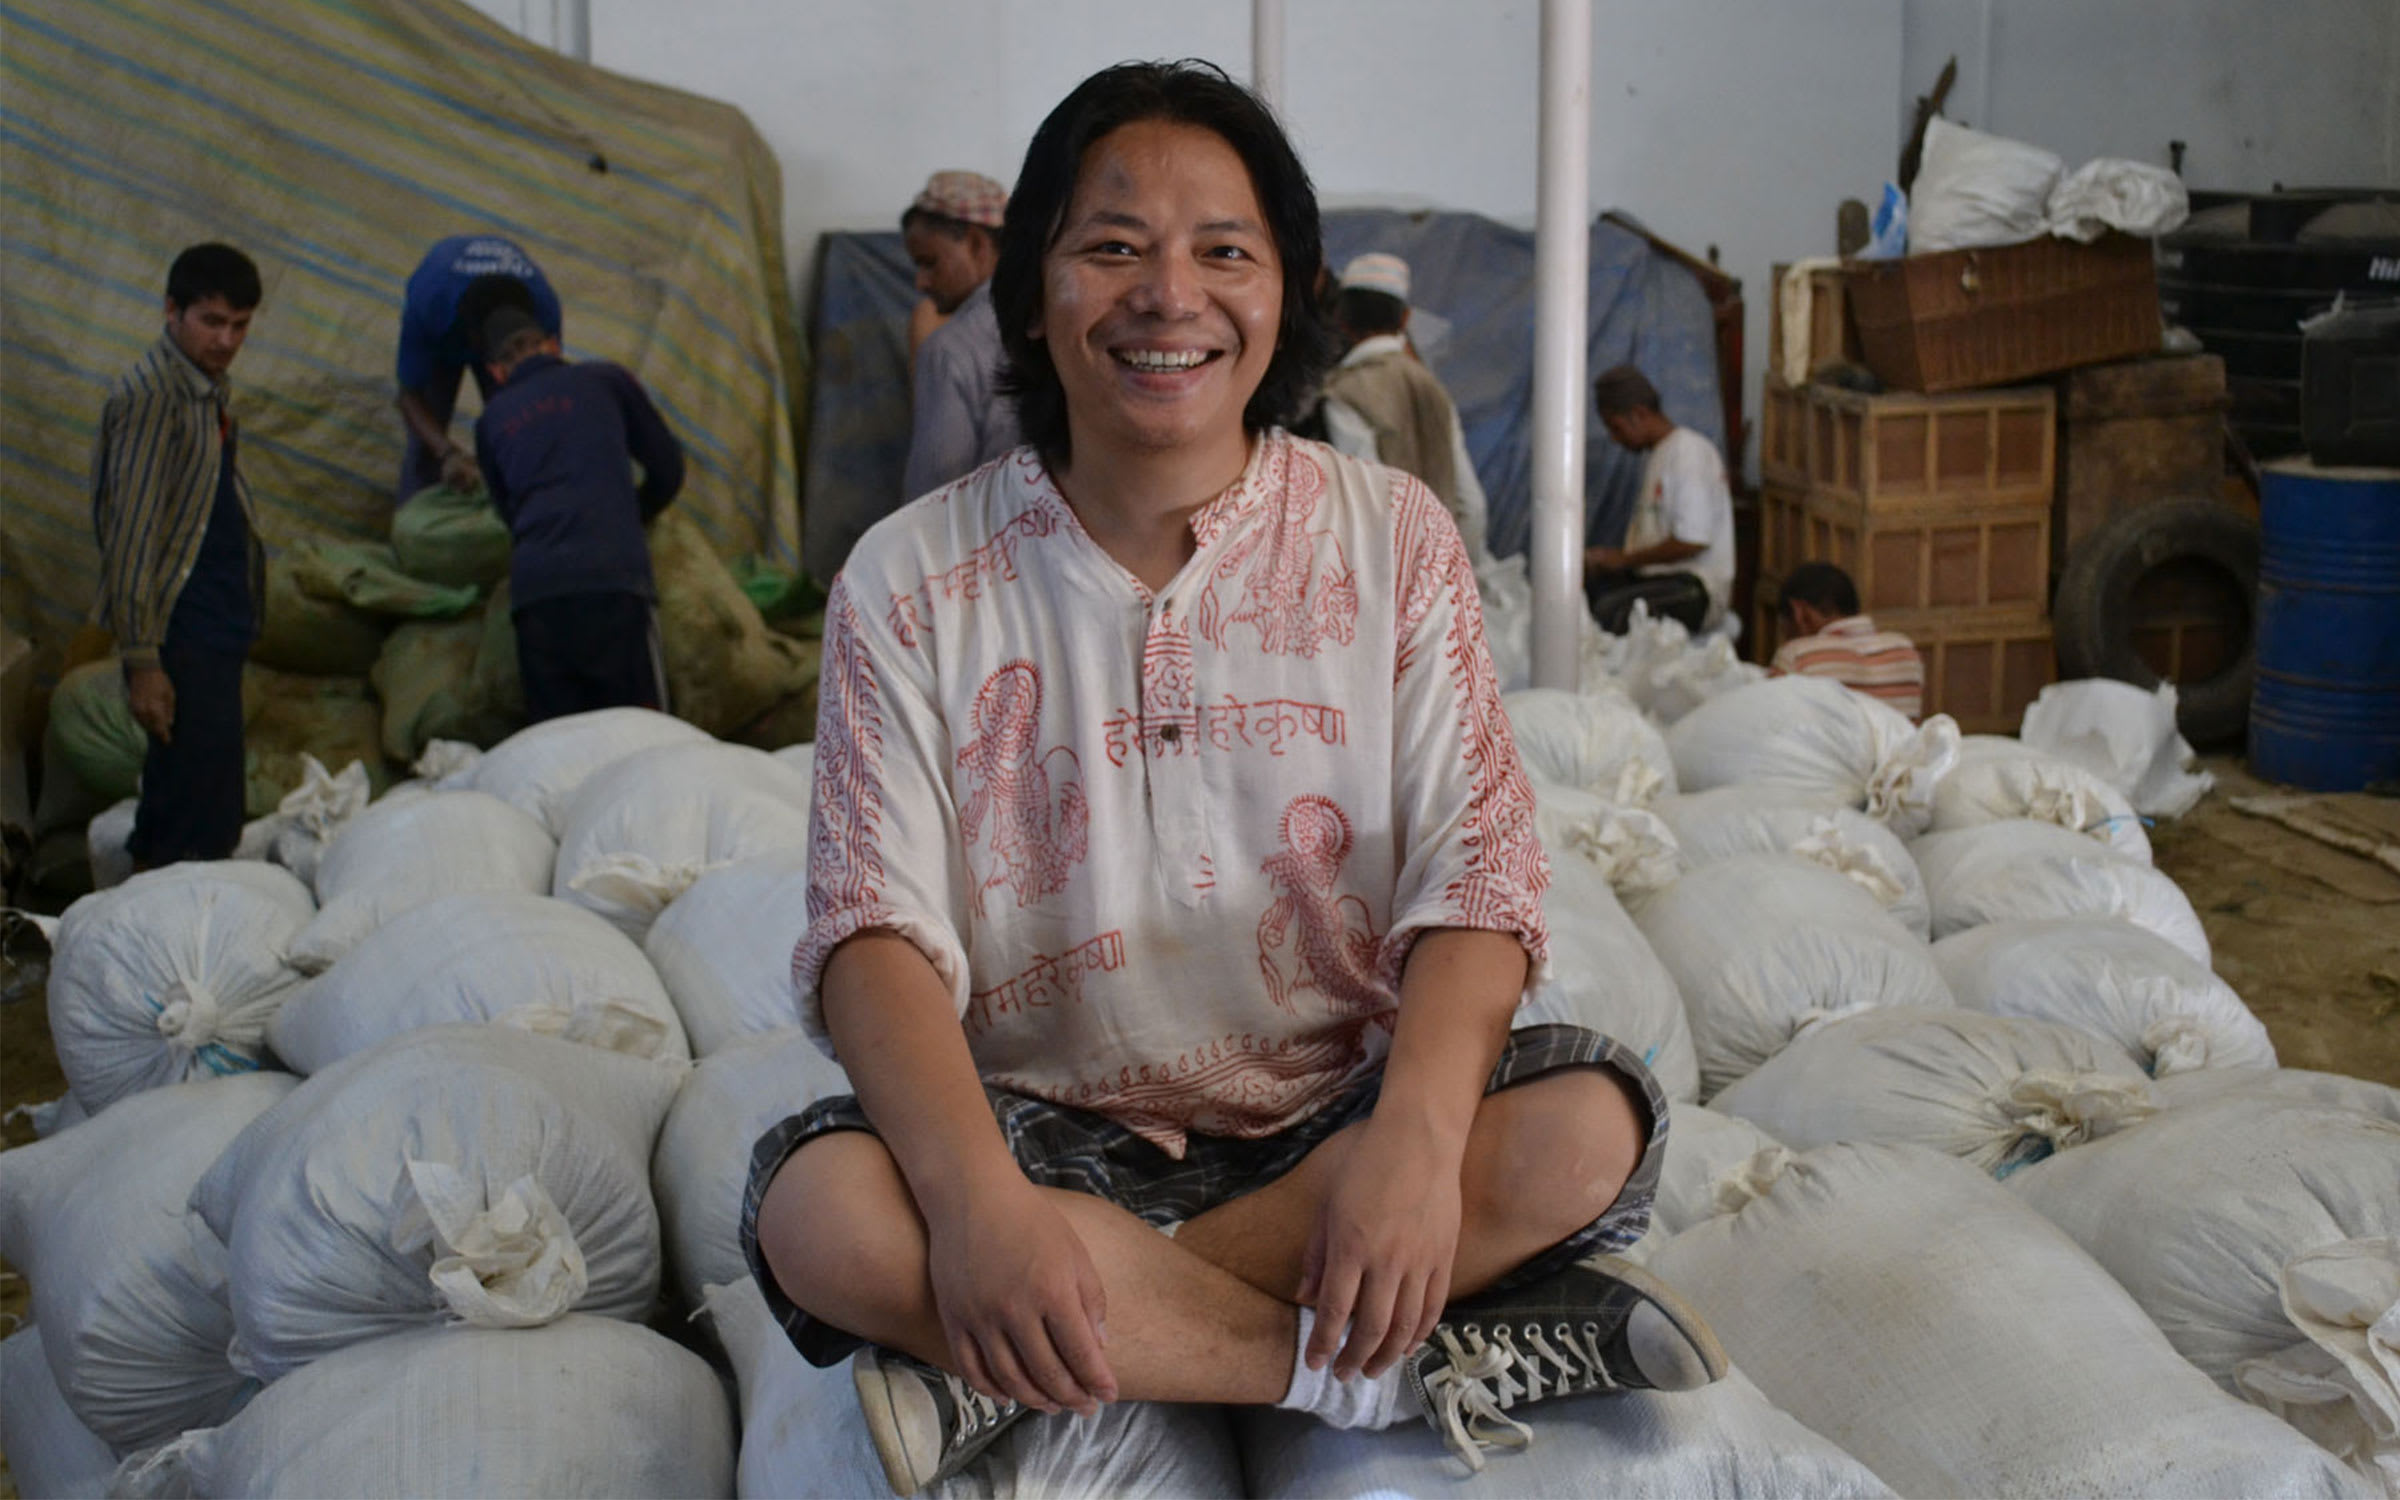 Tenzing Rigdol sitting on bags of soil, sourced as part of his 2011 work Our People, Our Land. Courtesy of the artist and Rossi 6 Rossi, Hong Kong.